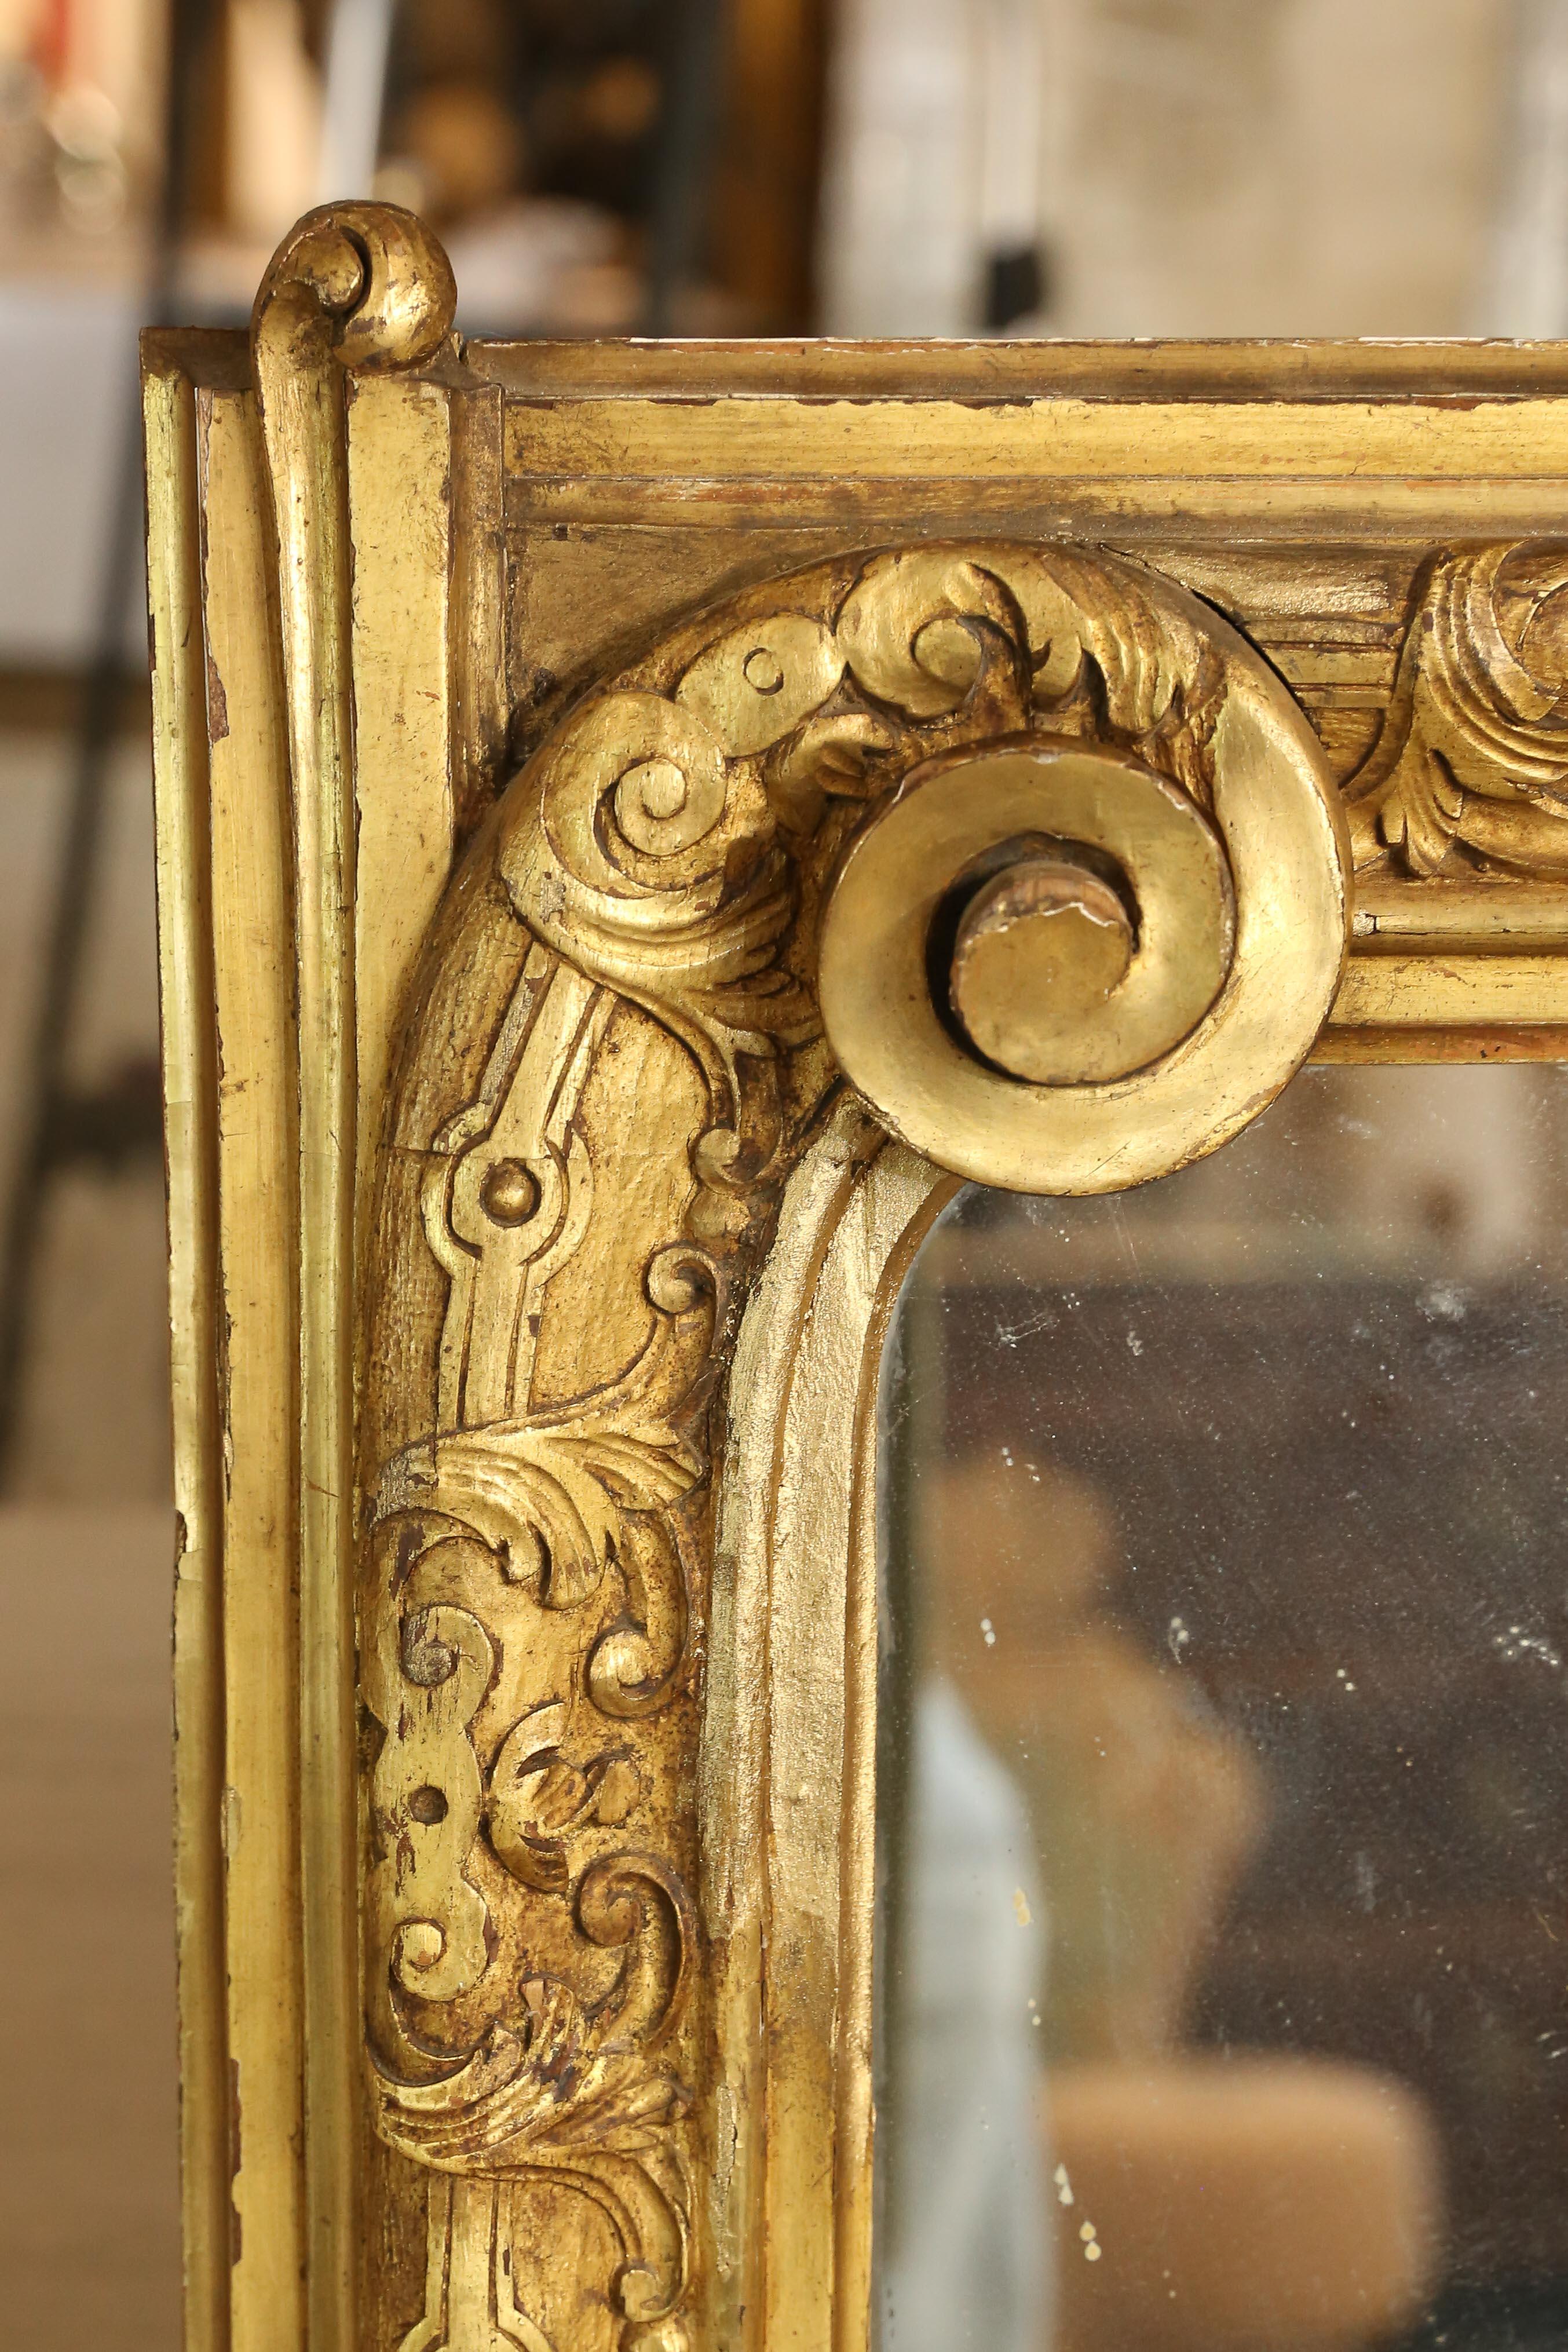 This is a fantastic antique French carved mirror, the scroll details at the upper corners are simply stunning. The entire frame is carved, with repeating scroll and leaf details. Another gorgeous detail of this mirror is the extension of one of the